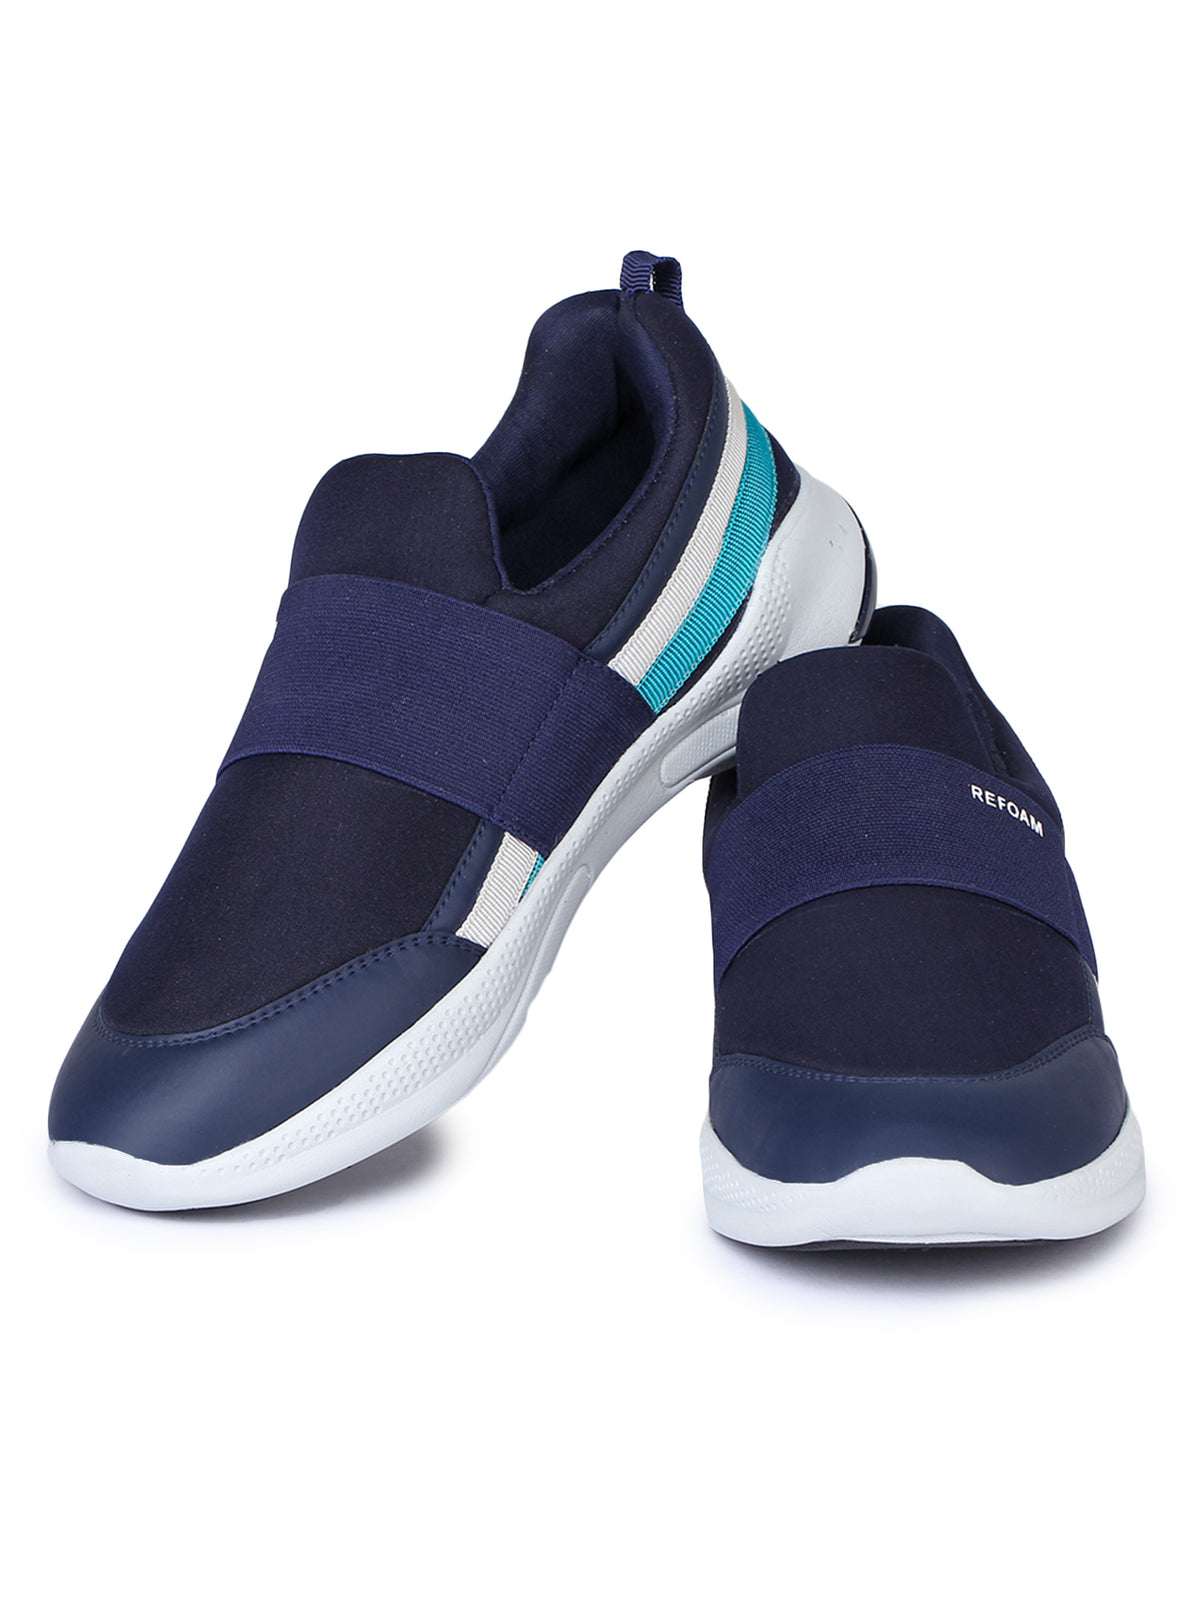 Navy Blue Solid Mesh Slip On Lifestyle Casual Shoes For Men